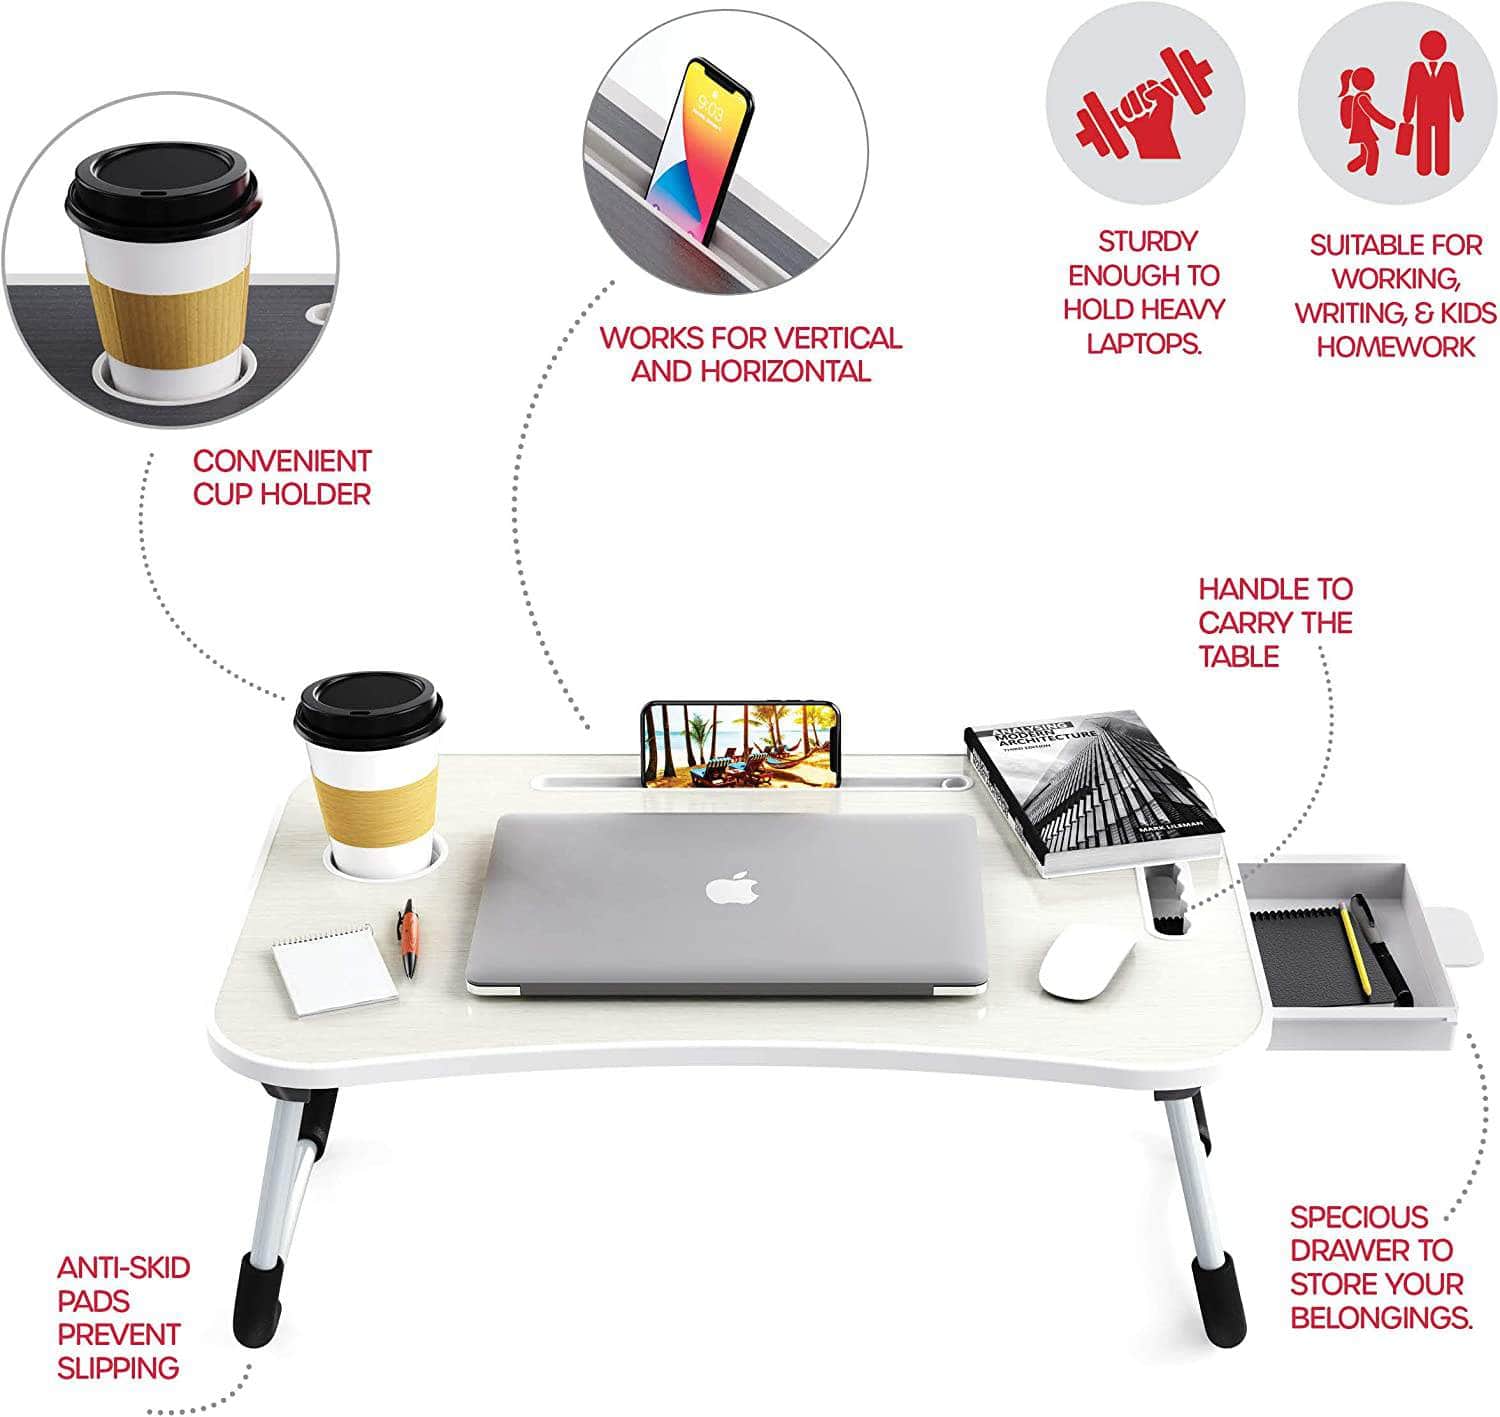 Versatile Laptop Bed Desk with Storage and Foldable Legs